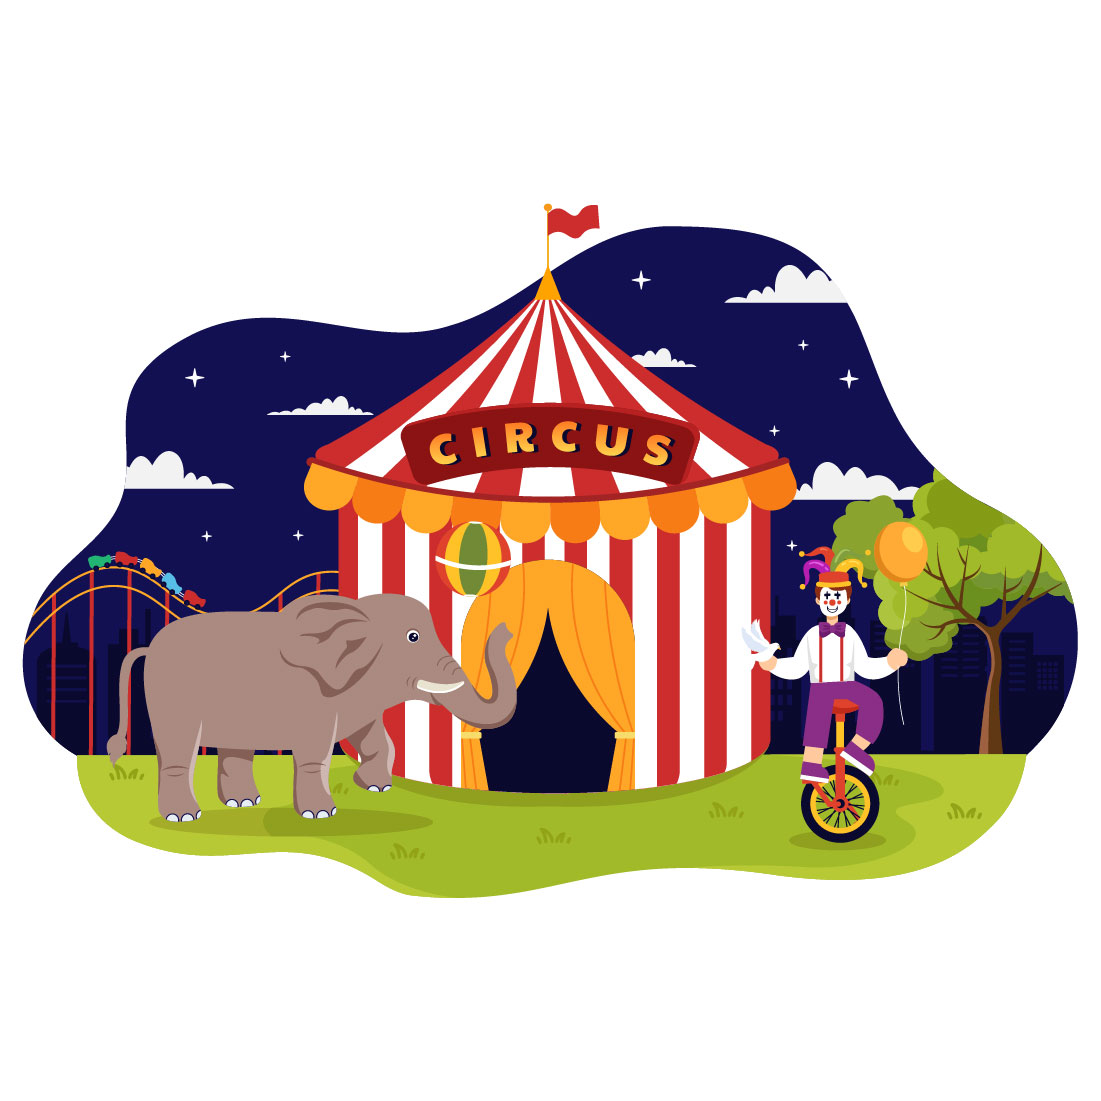 12 Circus Show Illustration preview image.